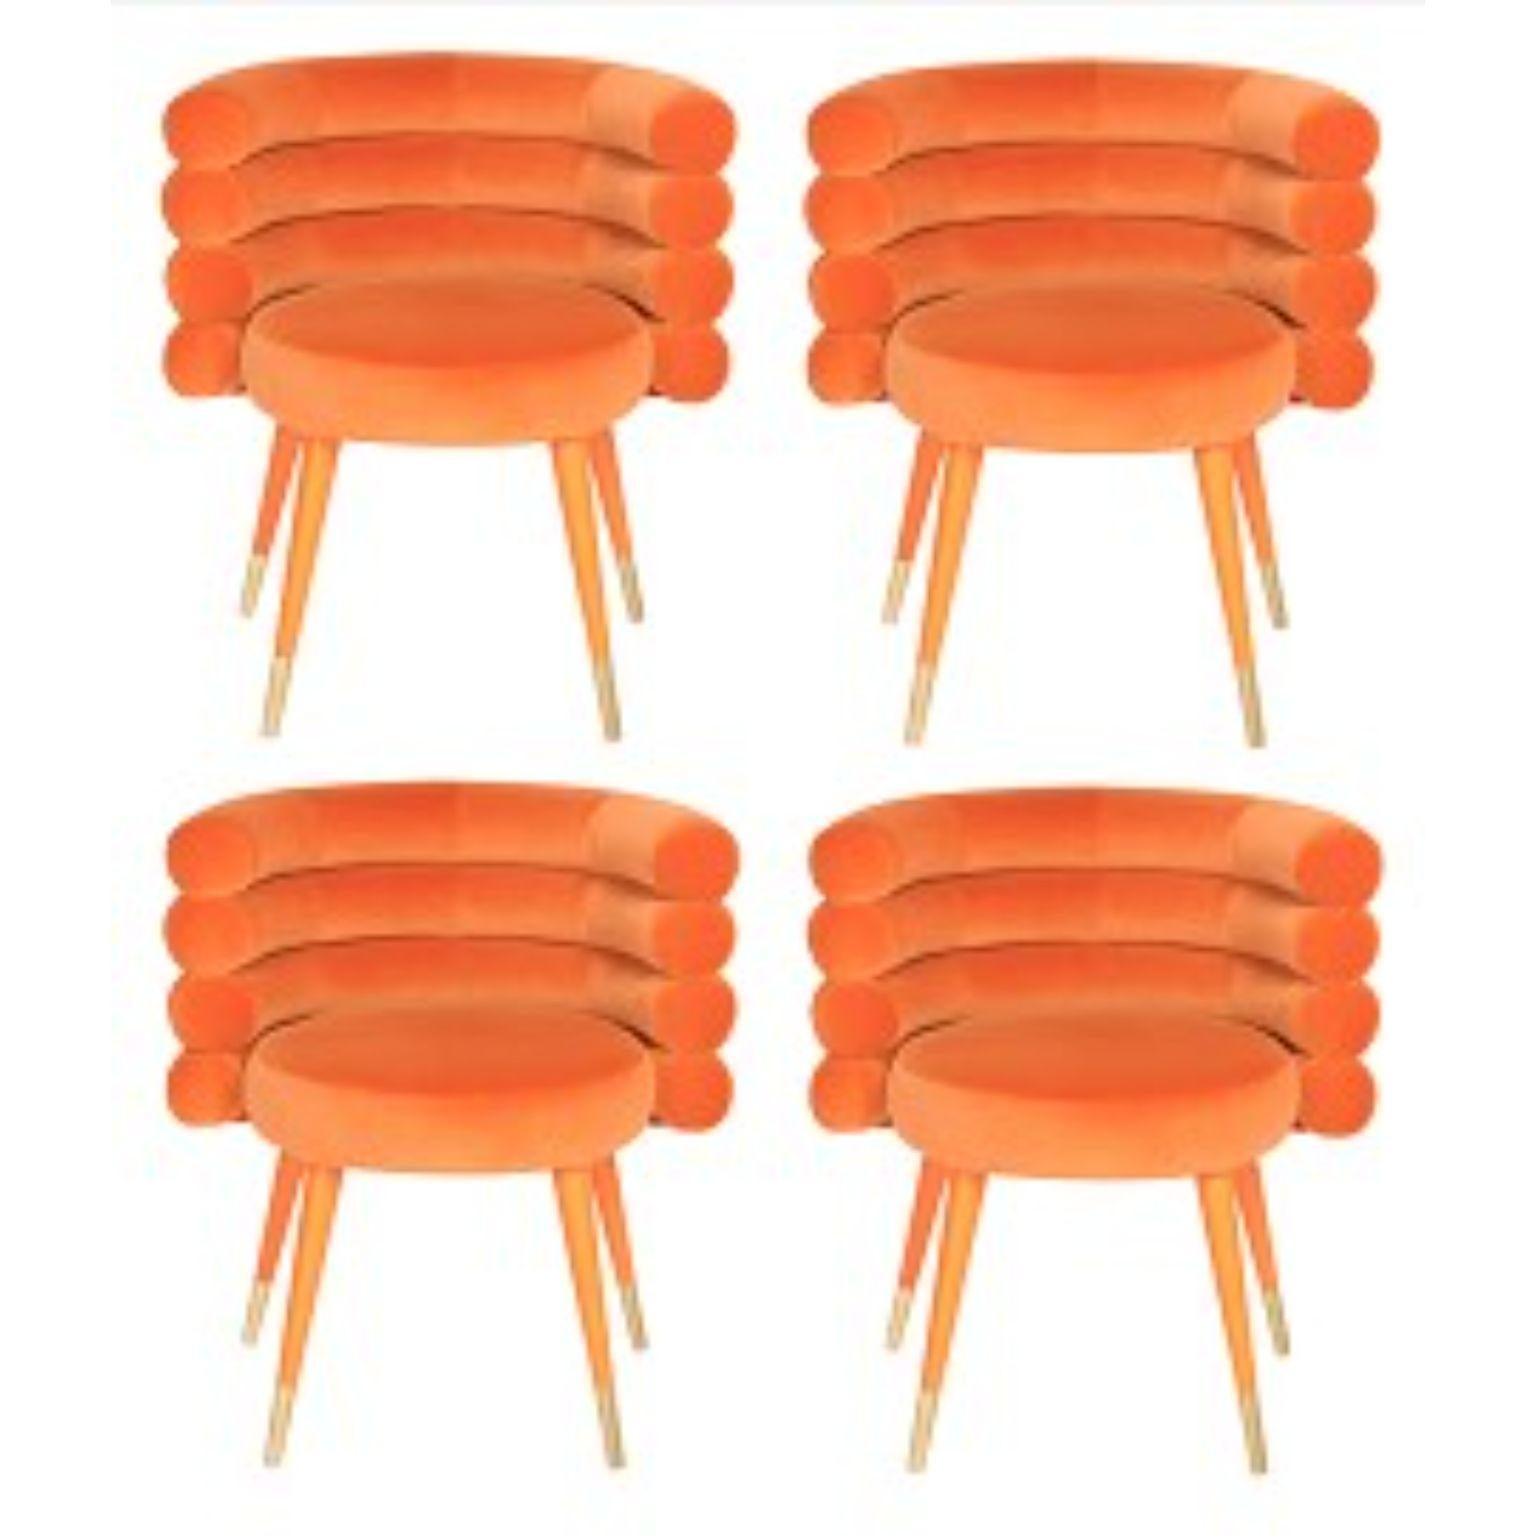 Set of 4 orange Marshmallow dining chairs, Royal Stranger
Dimensions: 78 x 70 x 60 cm
Materials: Velvet upholstery and brass
Available in: Mint green, light pink, royal green and royal red

Royal Stranger is an exclusive furniture brand